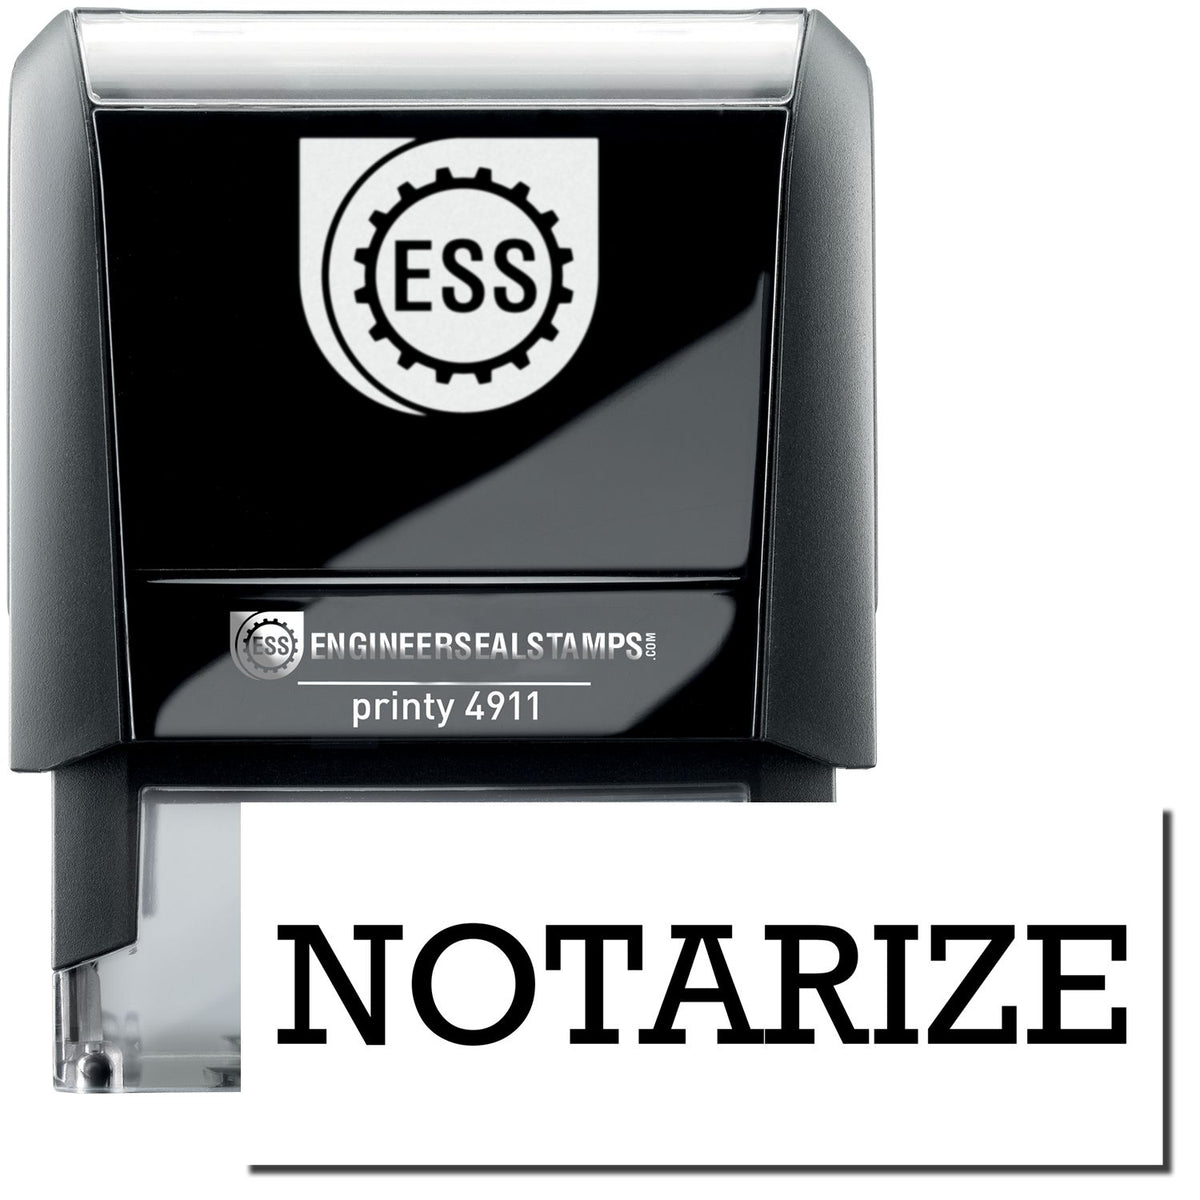 A self-inking stamp with a stamped image showing how the text &quot;NOTARIZE&quot; is displayed after stamping.